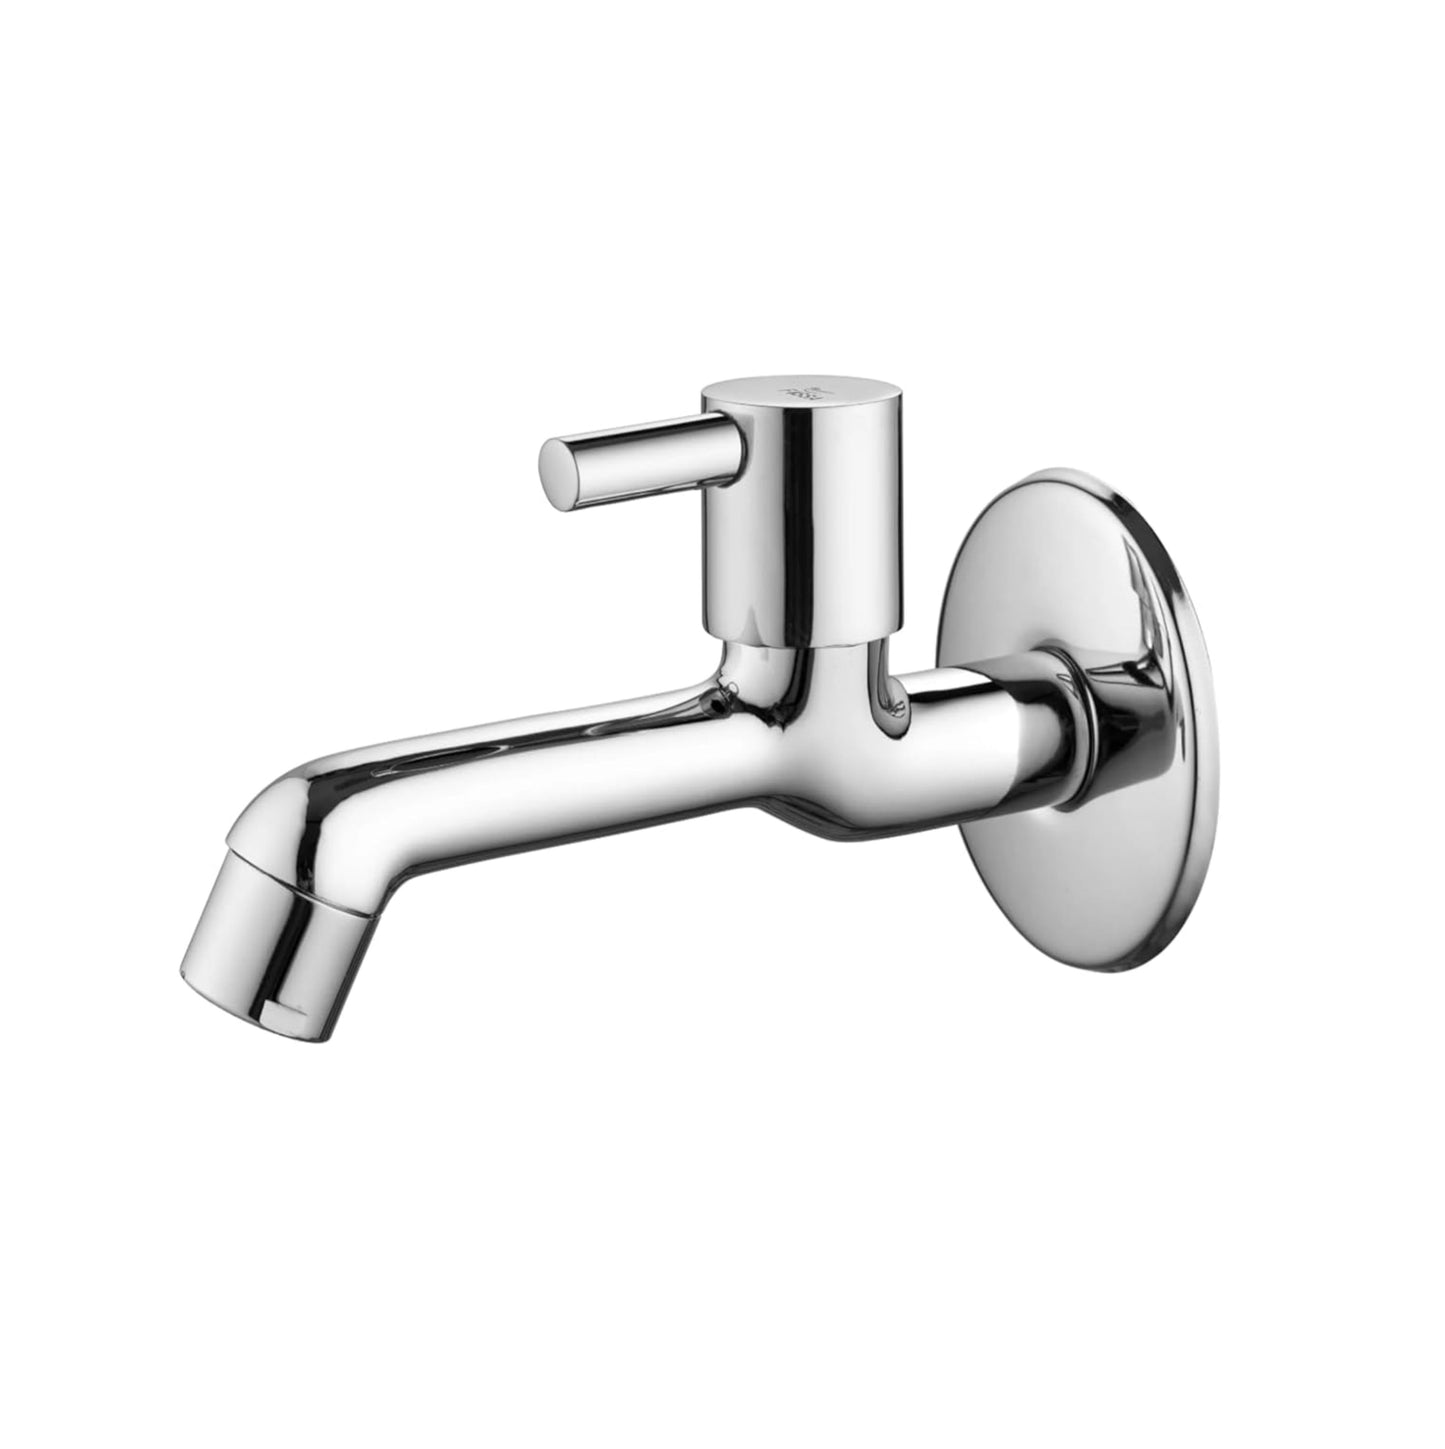 Fossa Orbit Brass Tap Faucet Bib Tap (Long Body) Wall Mounted for Bathroom, Kitchen Sink, Washing Areas, Gardens, Sink Faucet with Brass Tap with Wall Flange (Mirror-Chrome Finish)